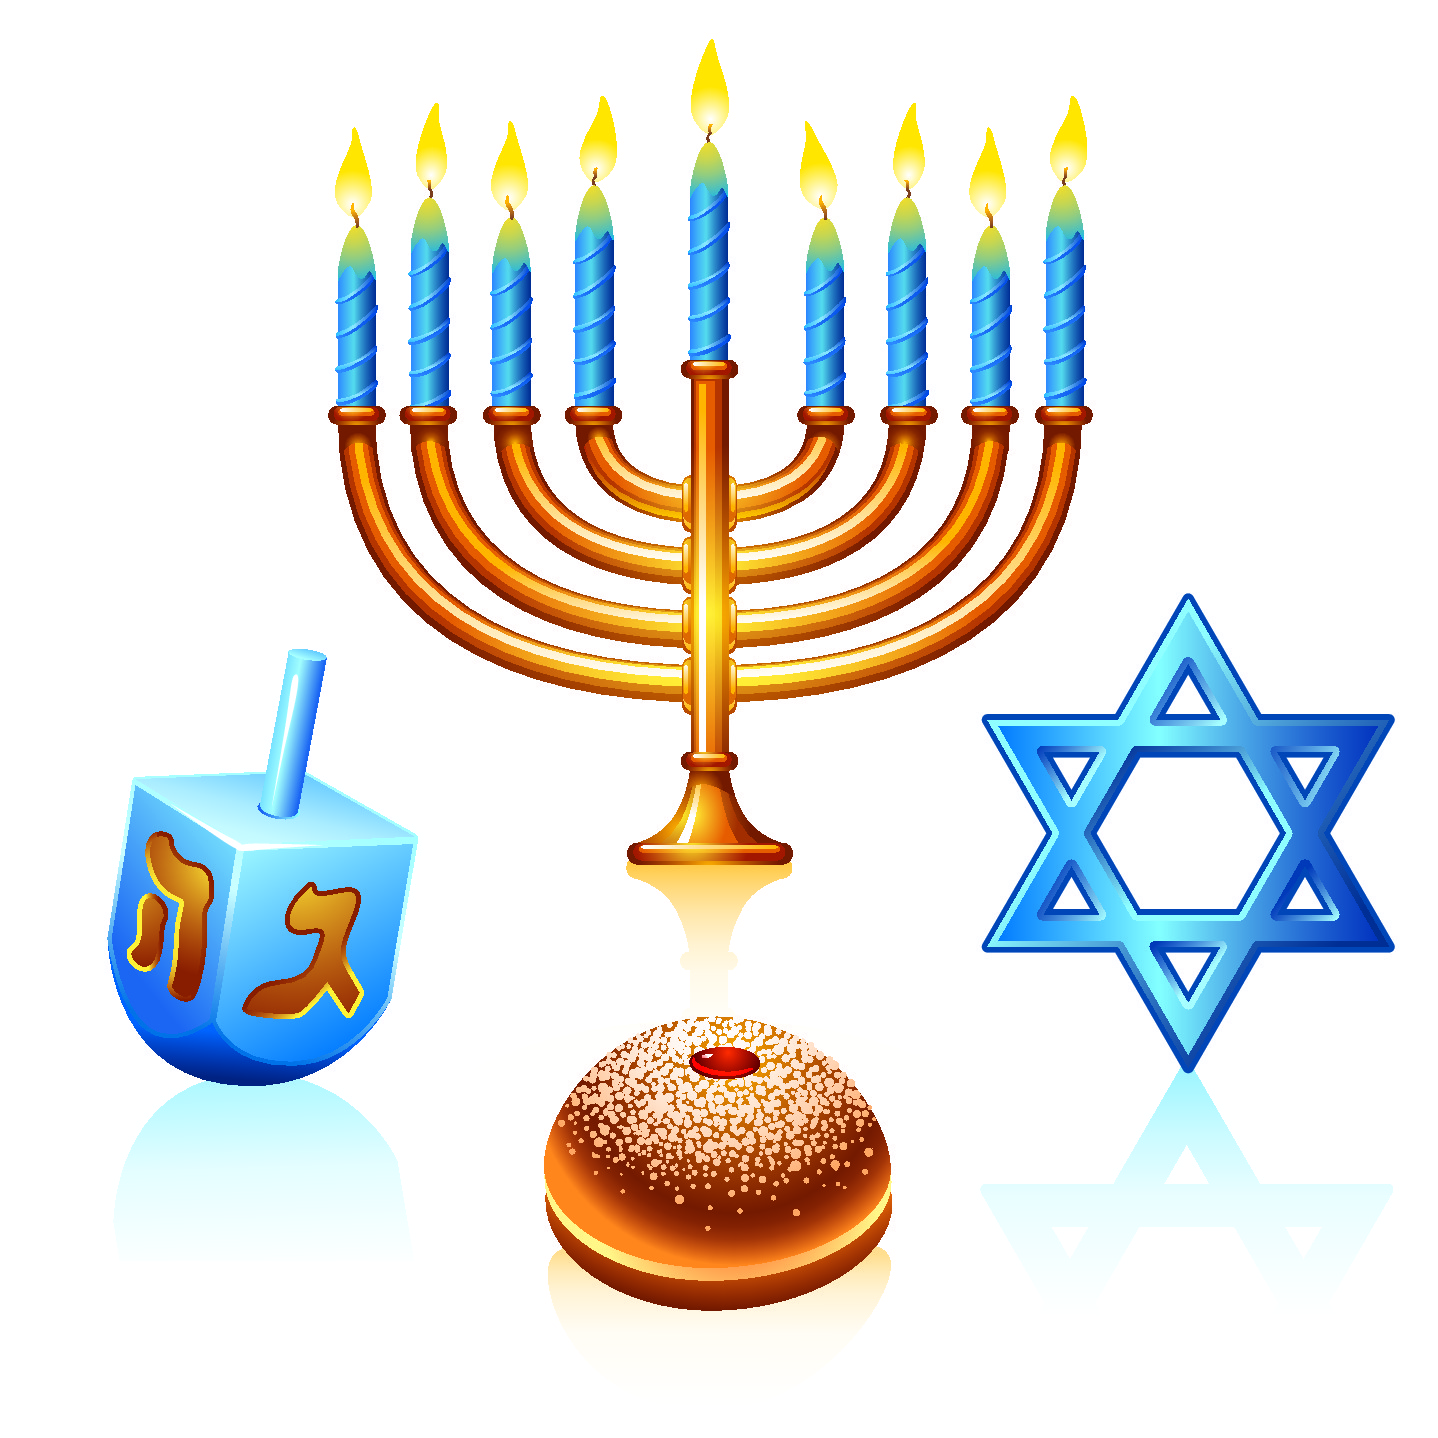 Alan Russell | Sr Loan Agent: Happy Hanukkah- how about some trivia?